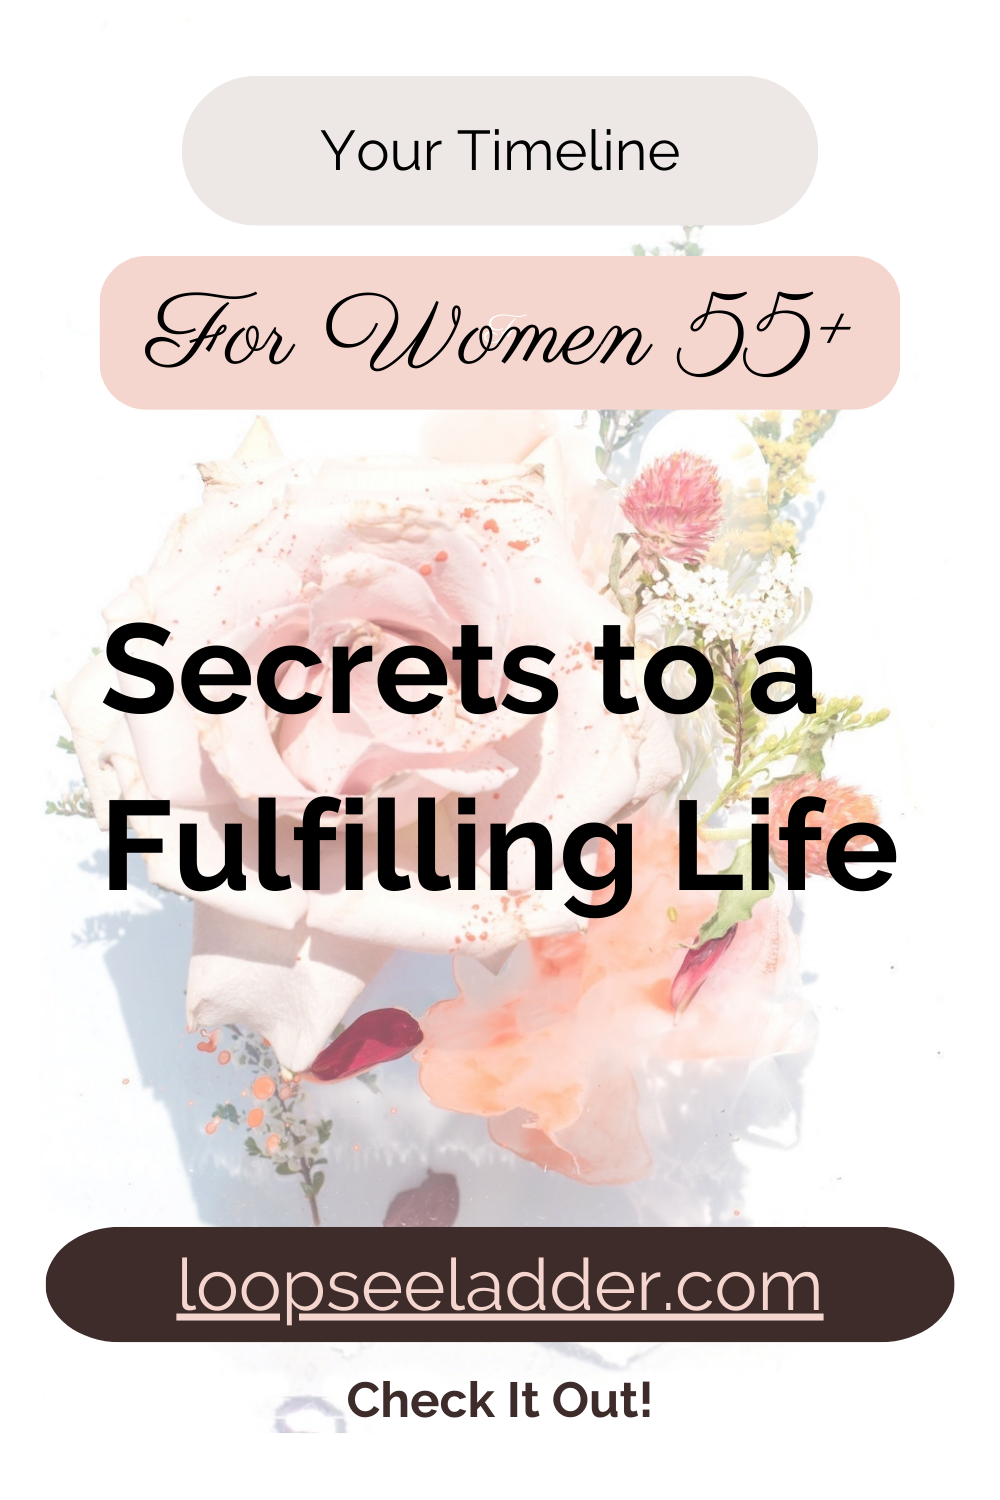 The Secret to Living a Fulfilling Life After 55